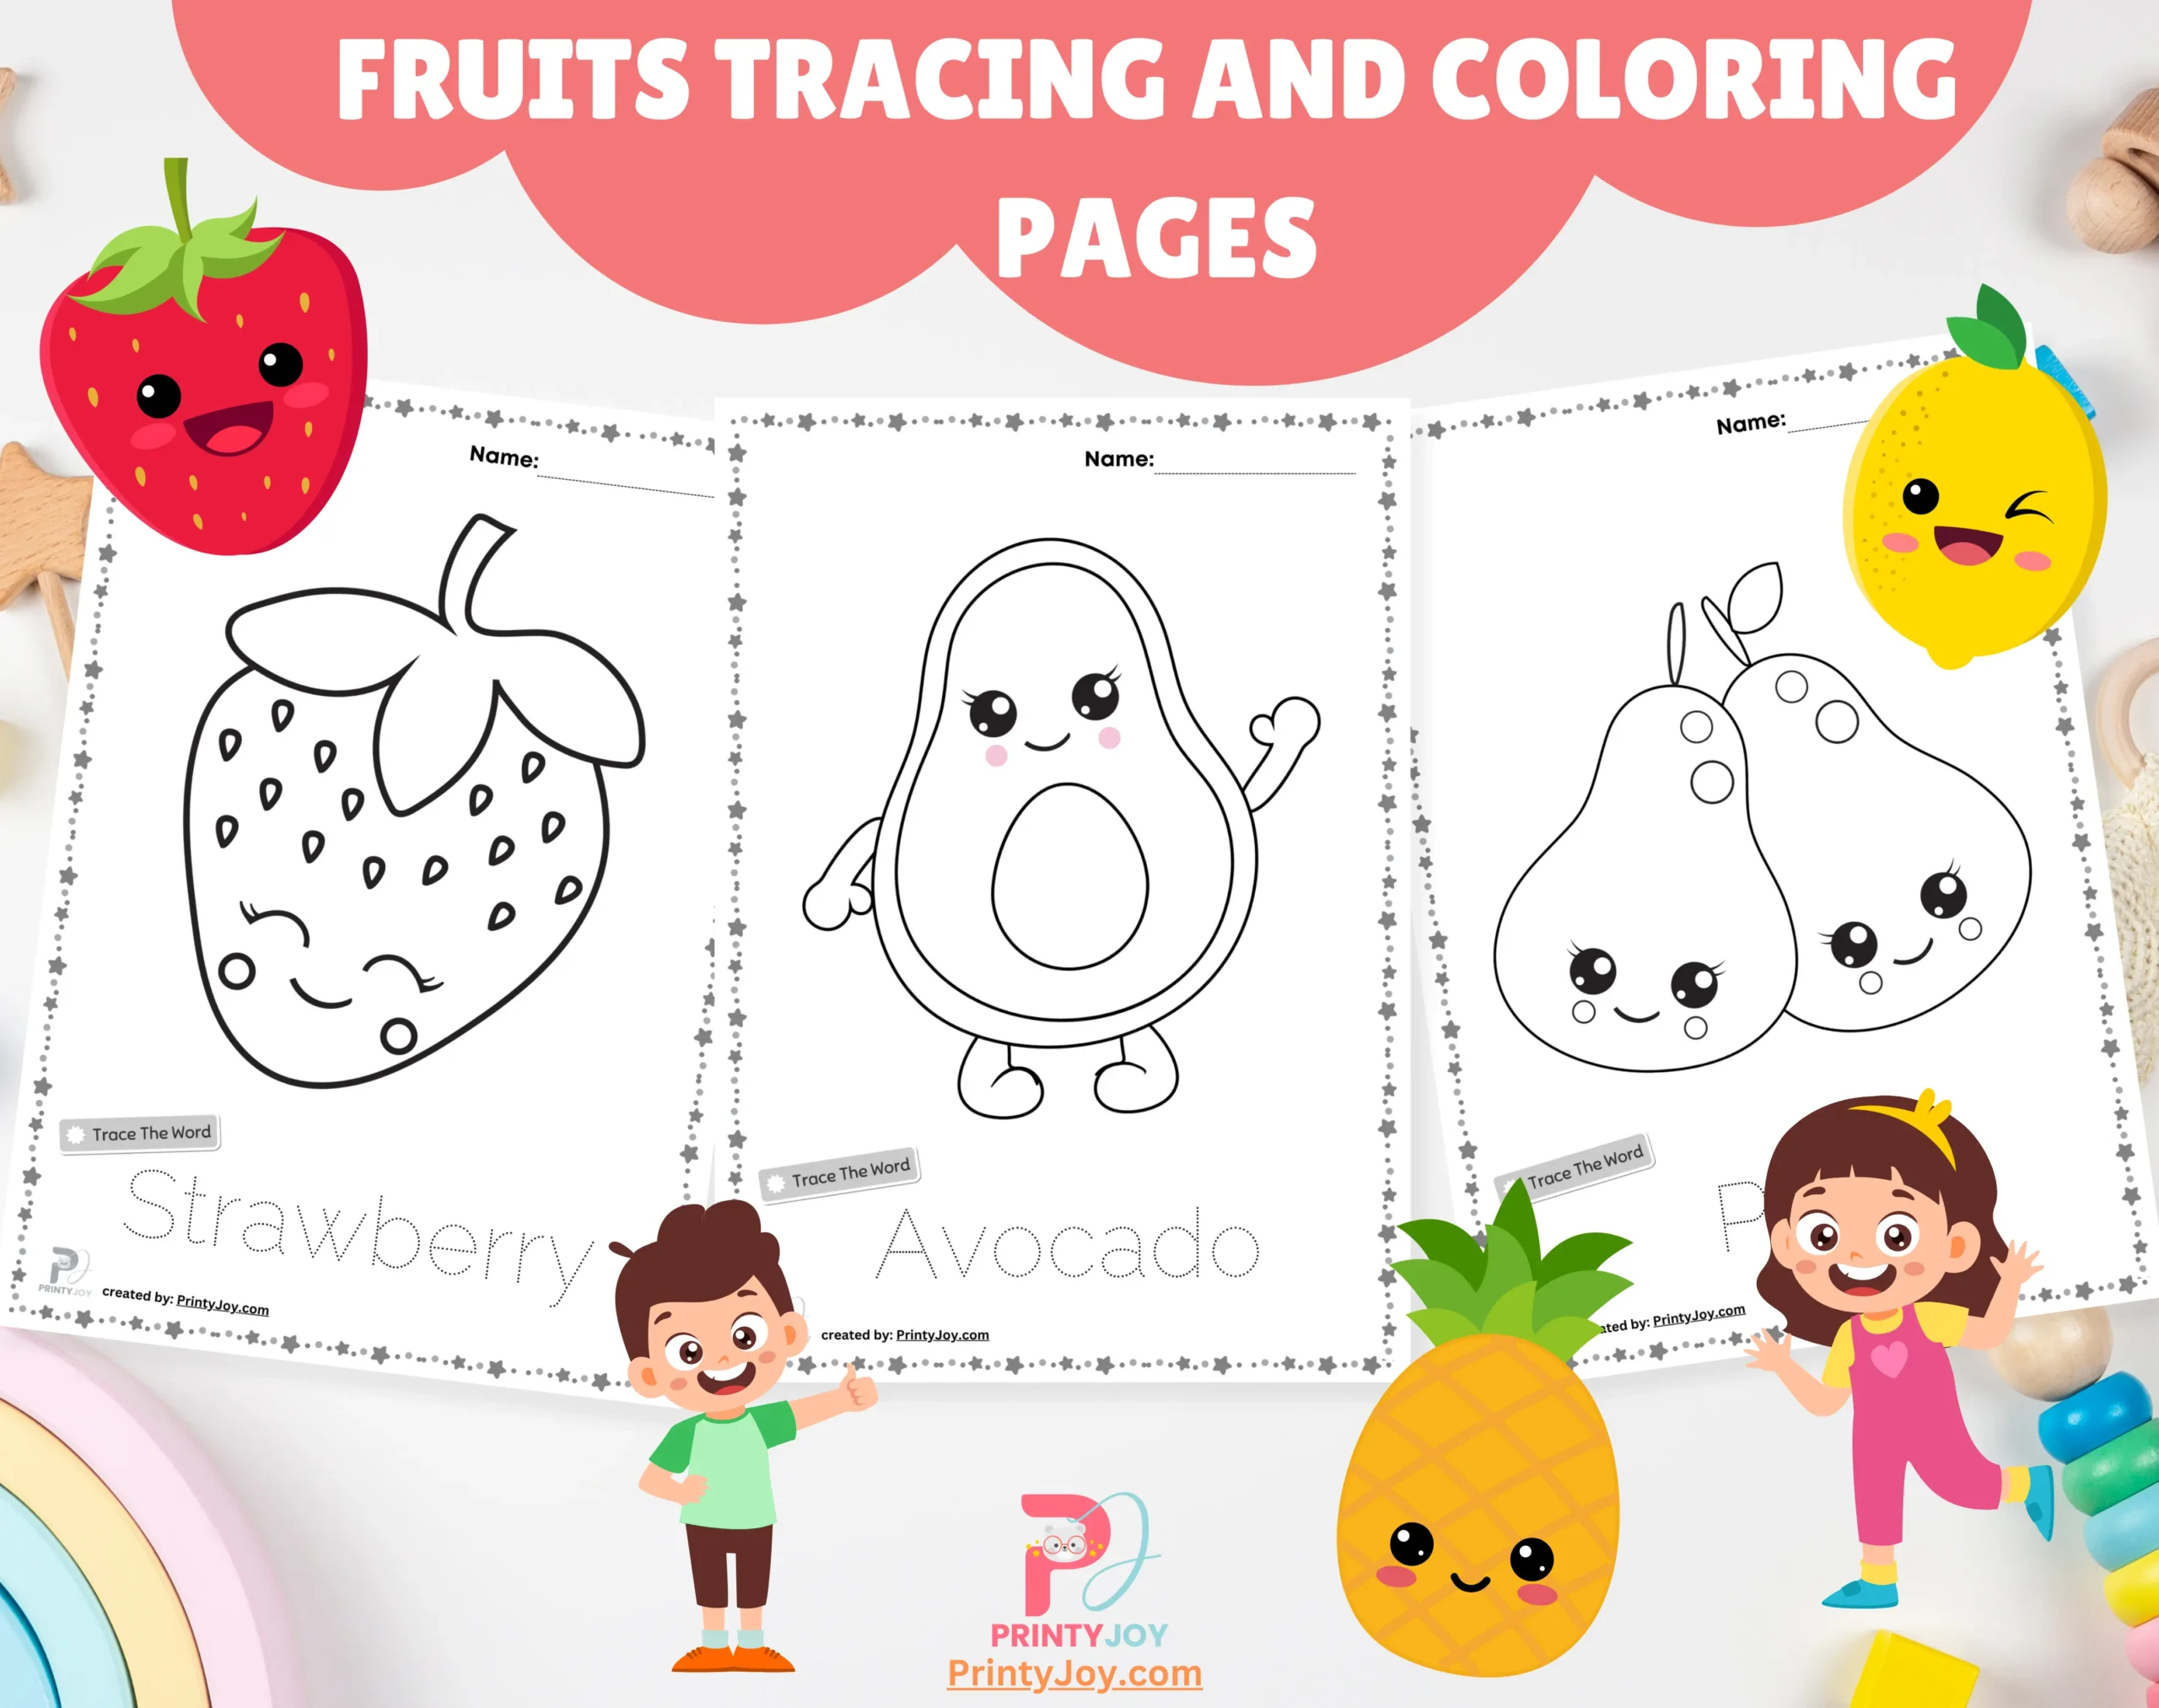 Fruits Tracing And Coloring Pages